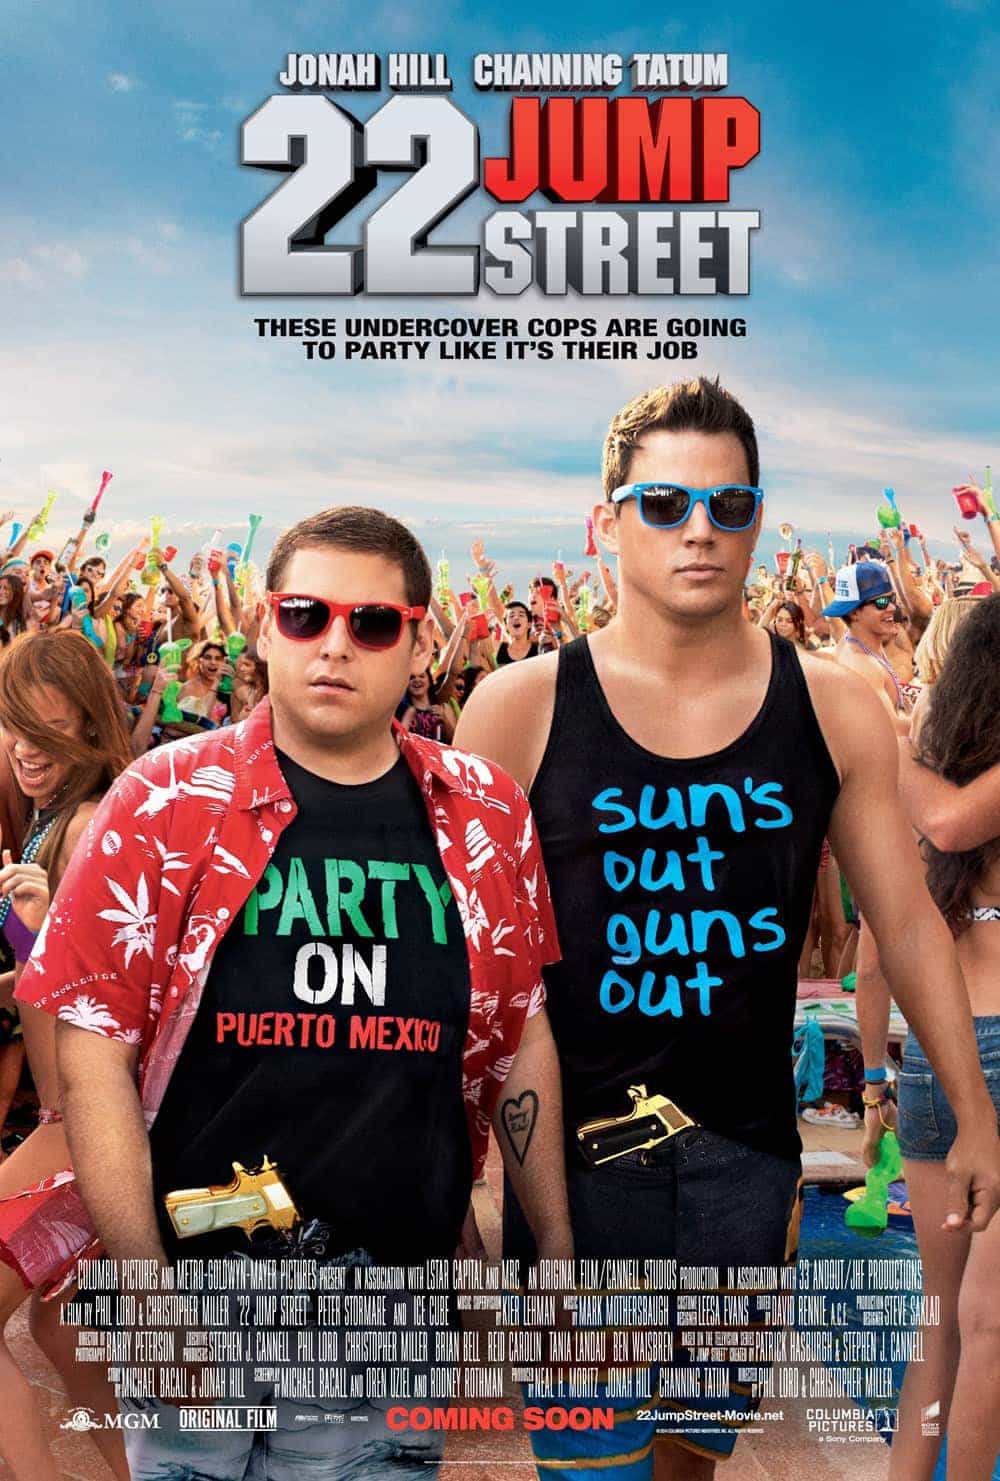 UK Box Office Weekend Report 13th - 15th June 2014:  22 Jump Street stays at the top for another week